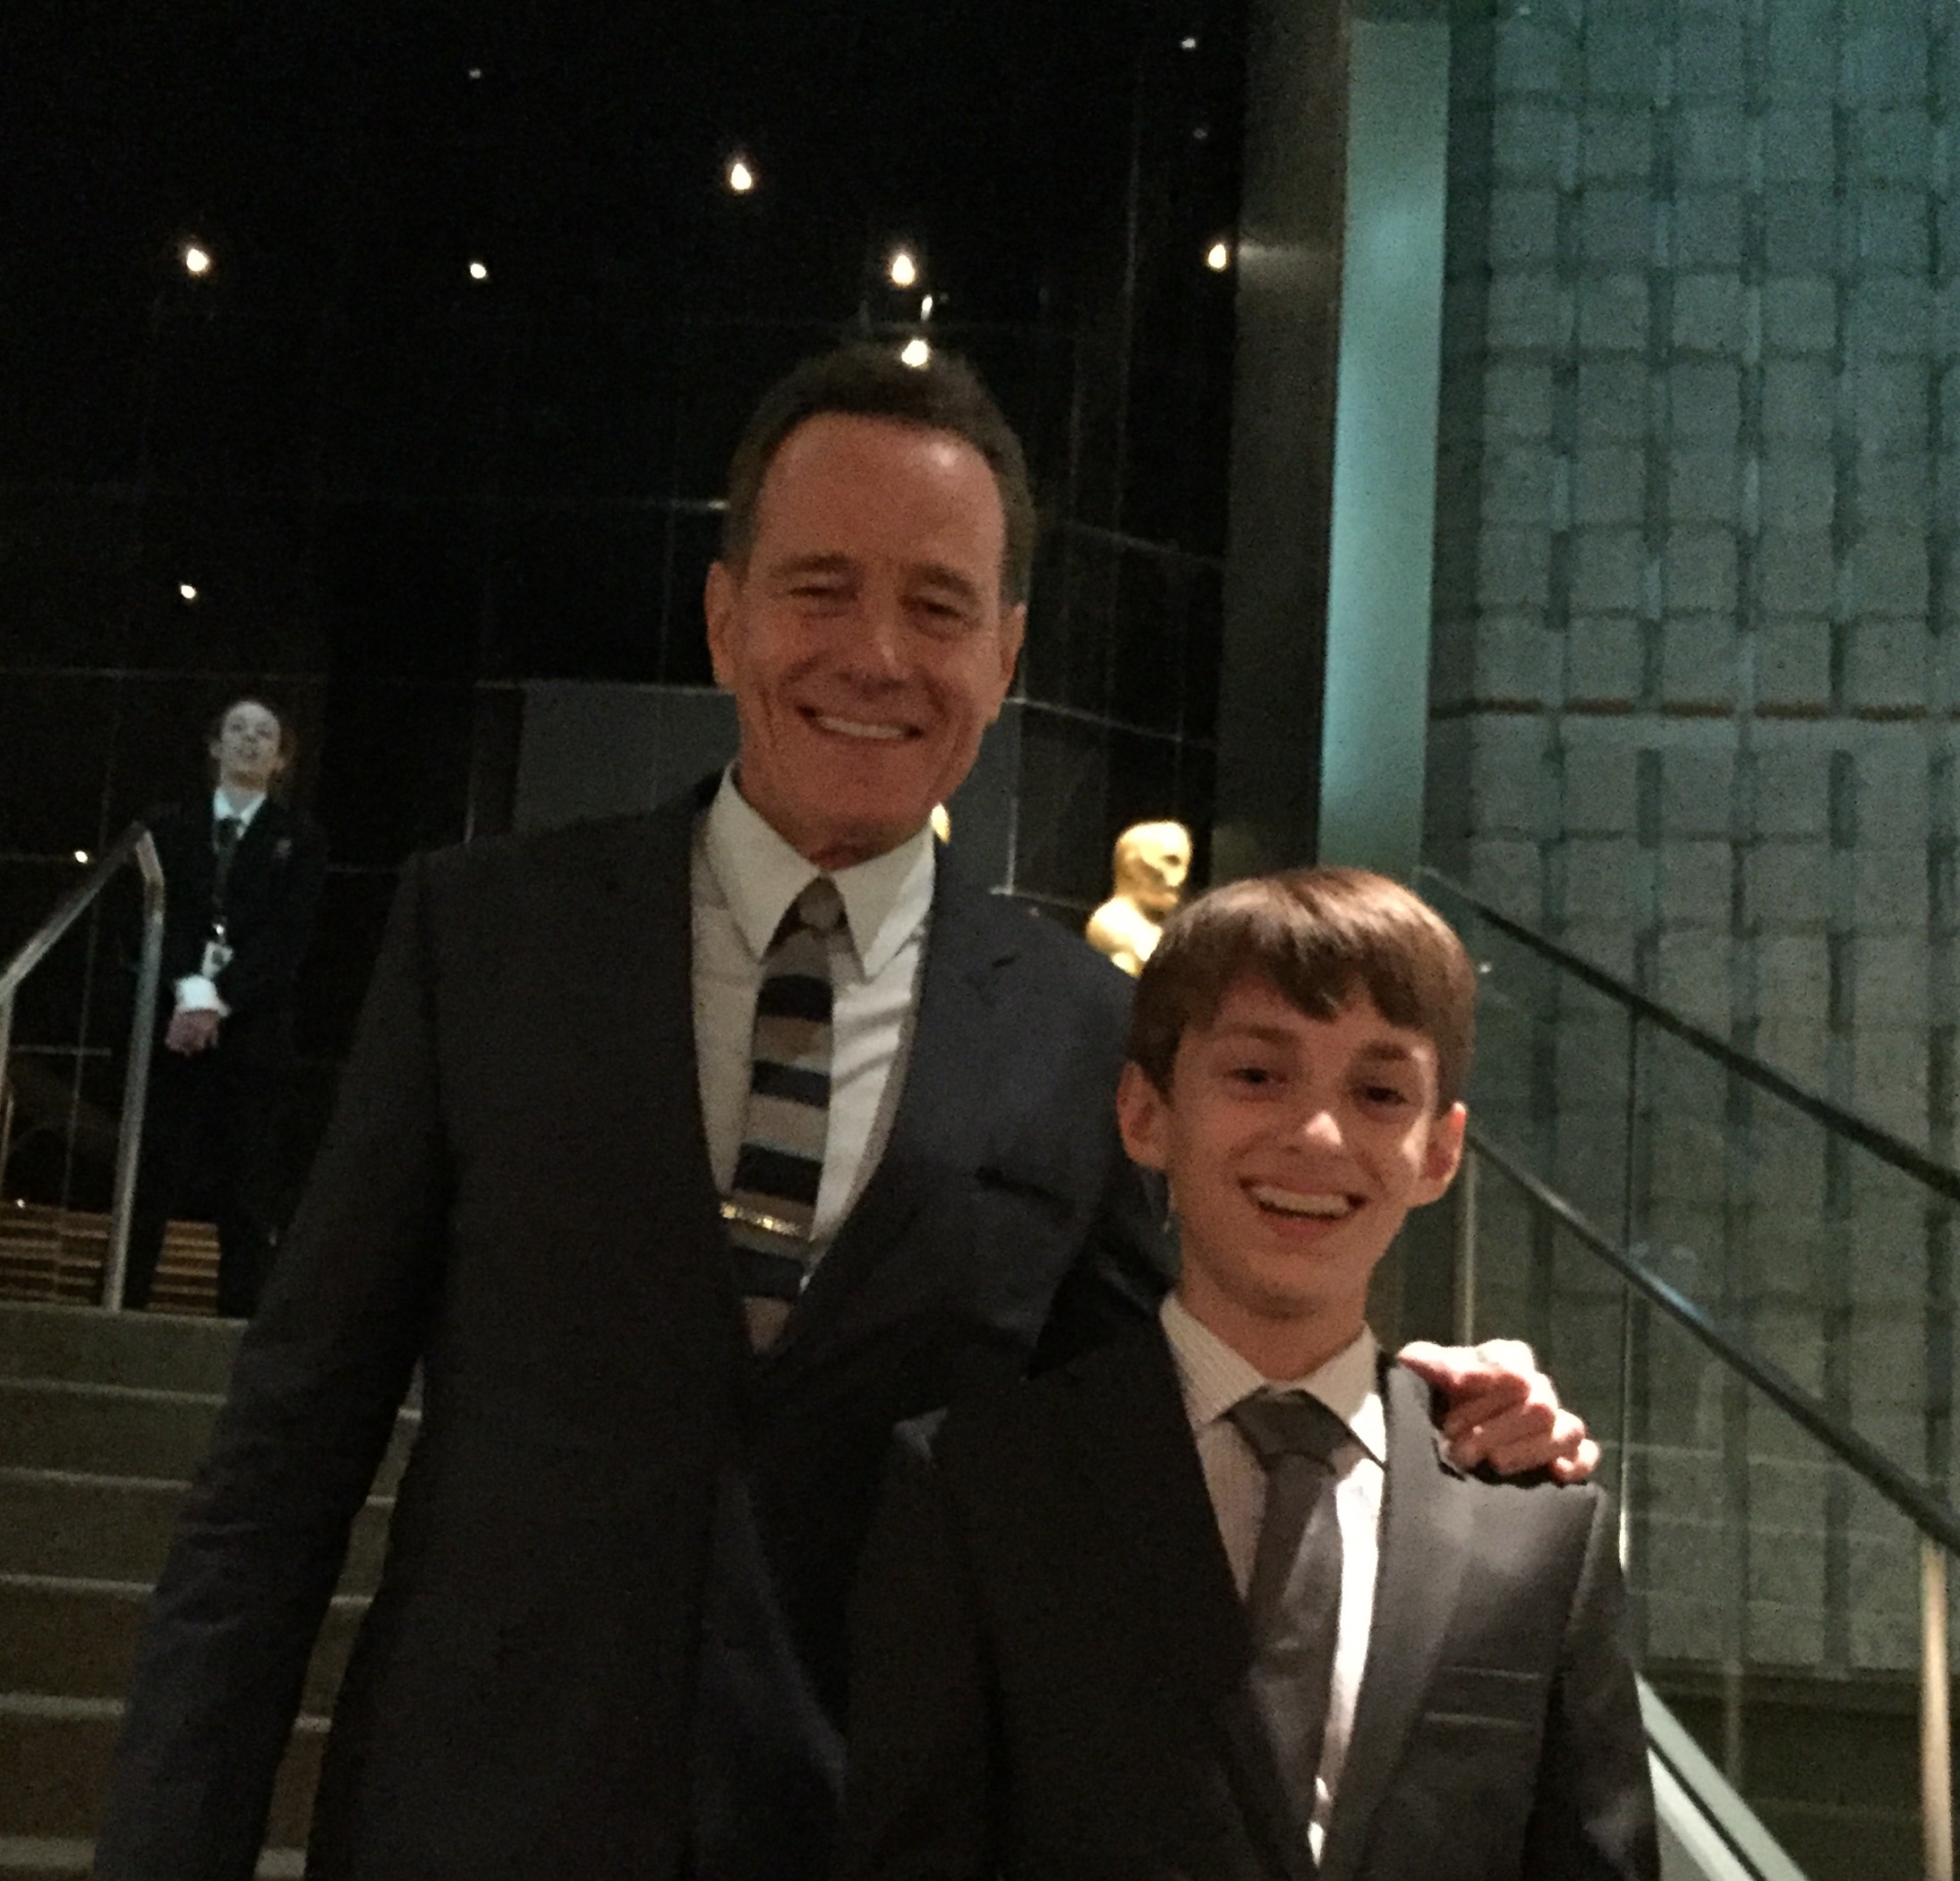 At the Los Angeles Premier of Trumbo with Bryan Cranston.